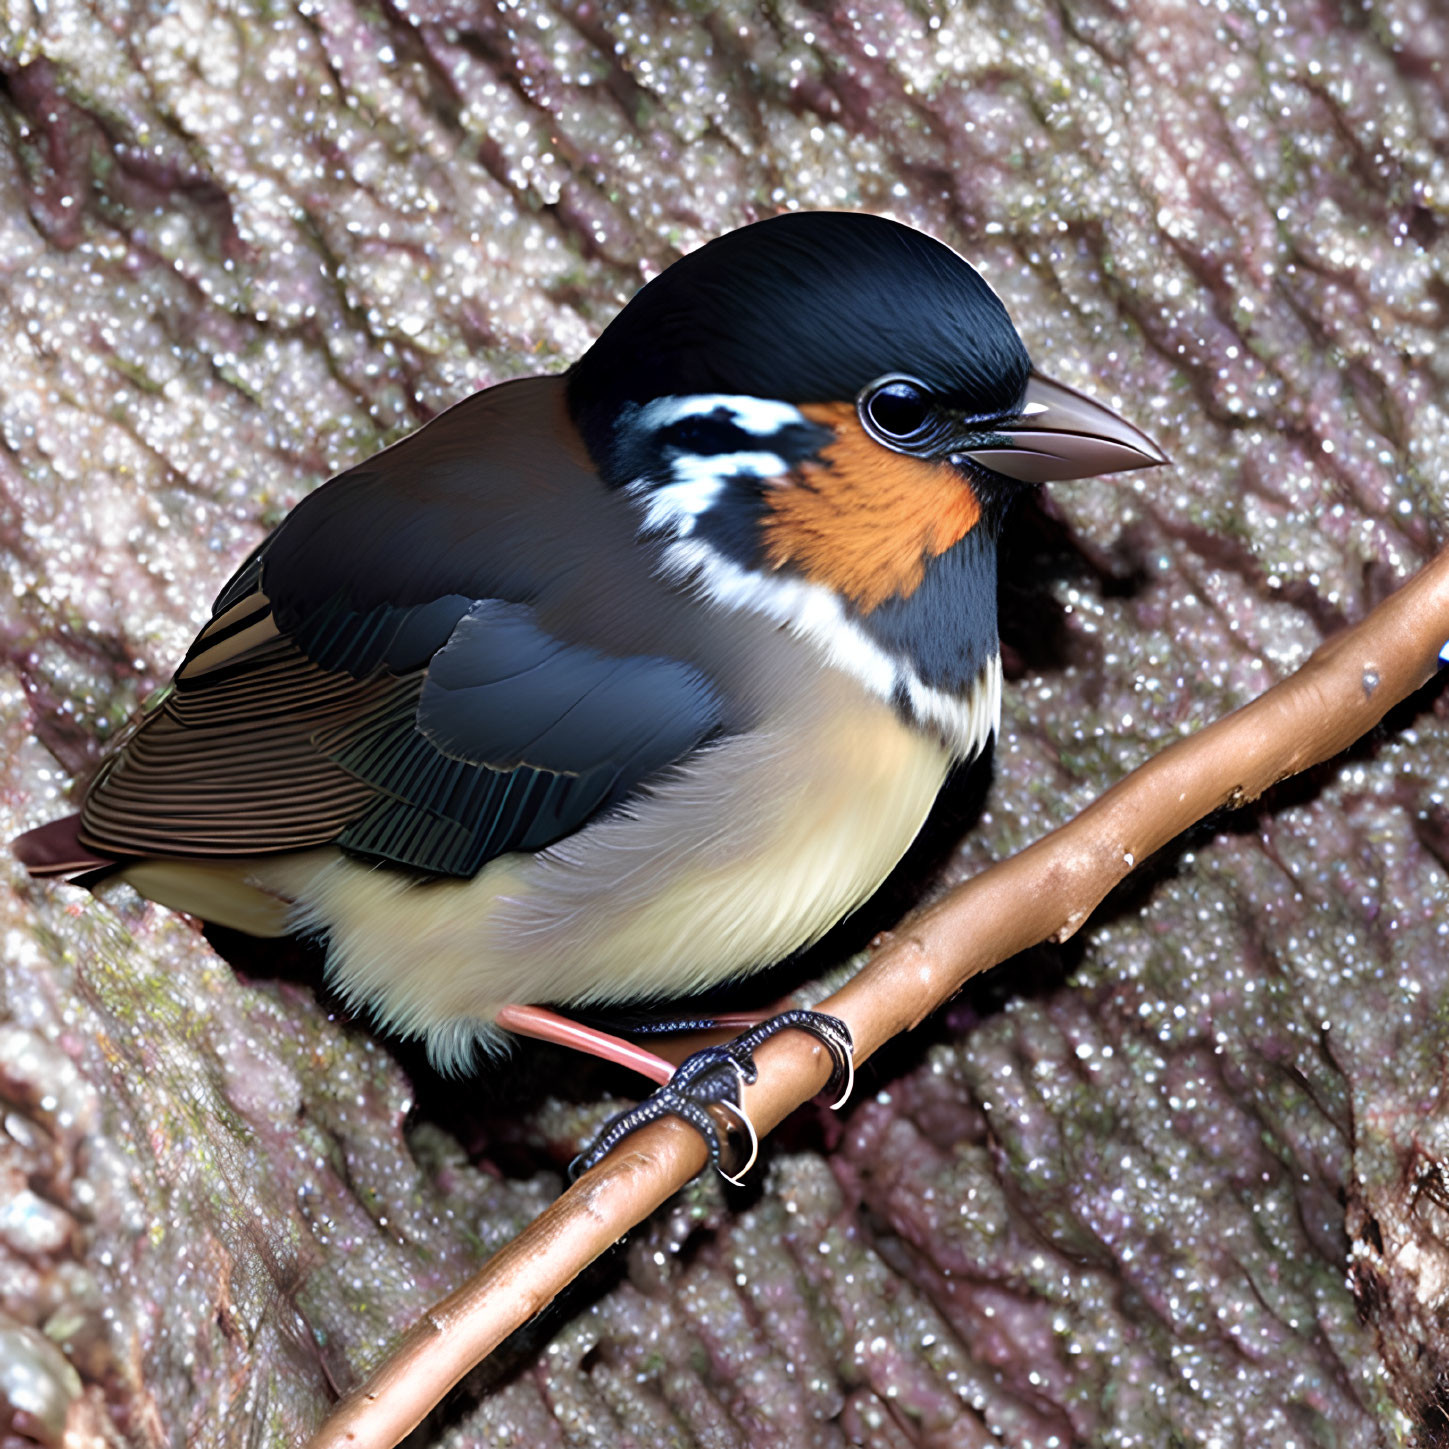 Colorful bird with black, white, blue, and orange-brown plumage on branch against textured